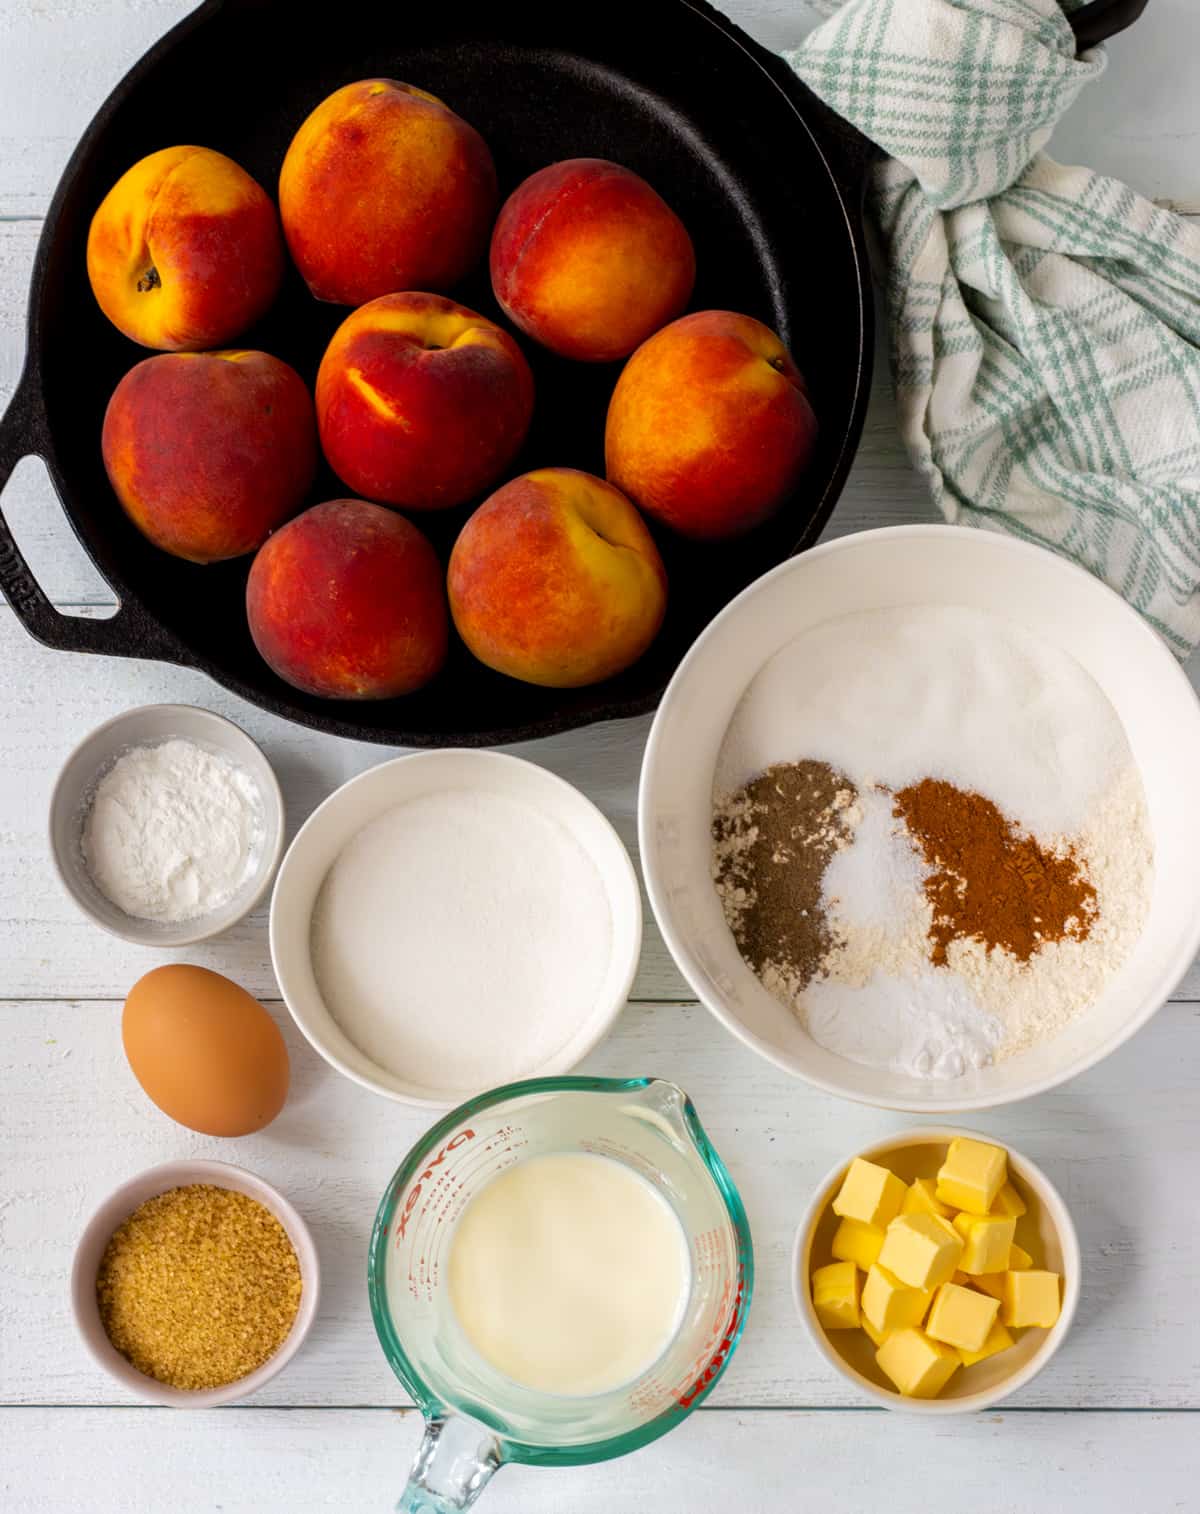 Ingredients for cast iron peach cobbler.